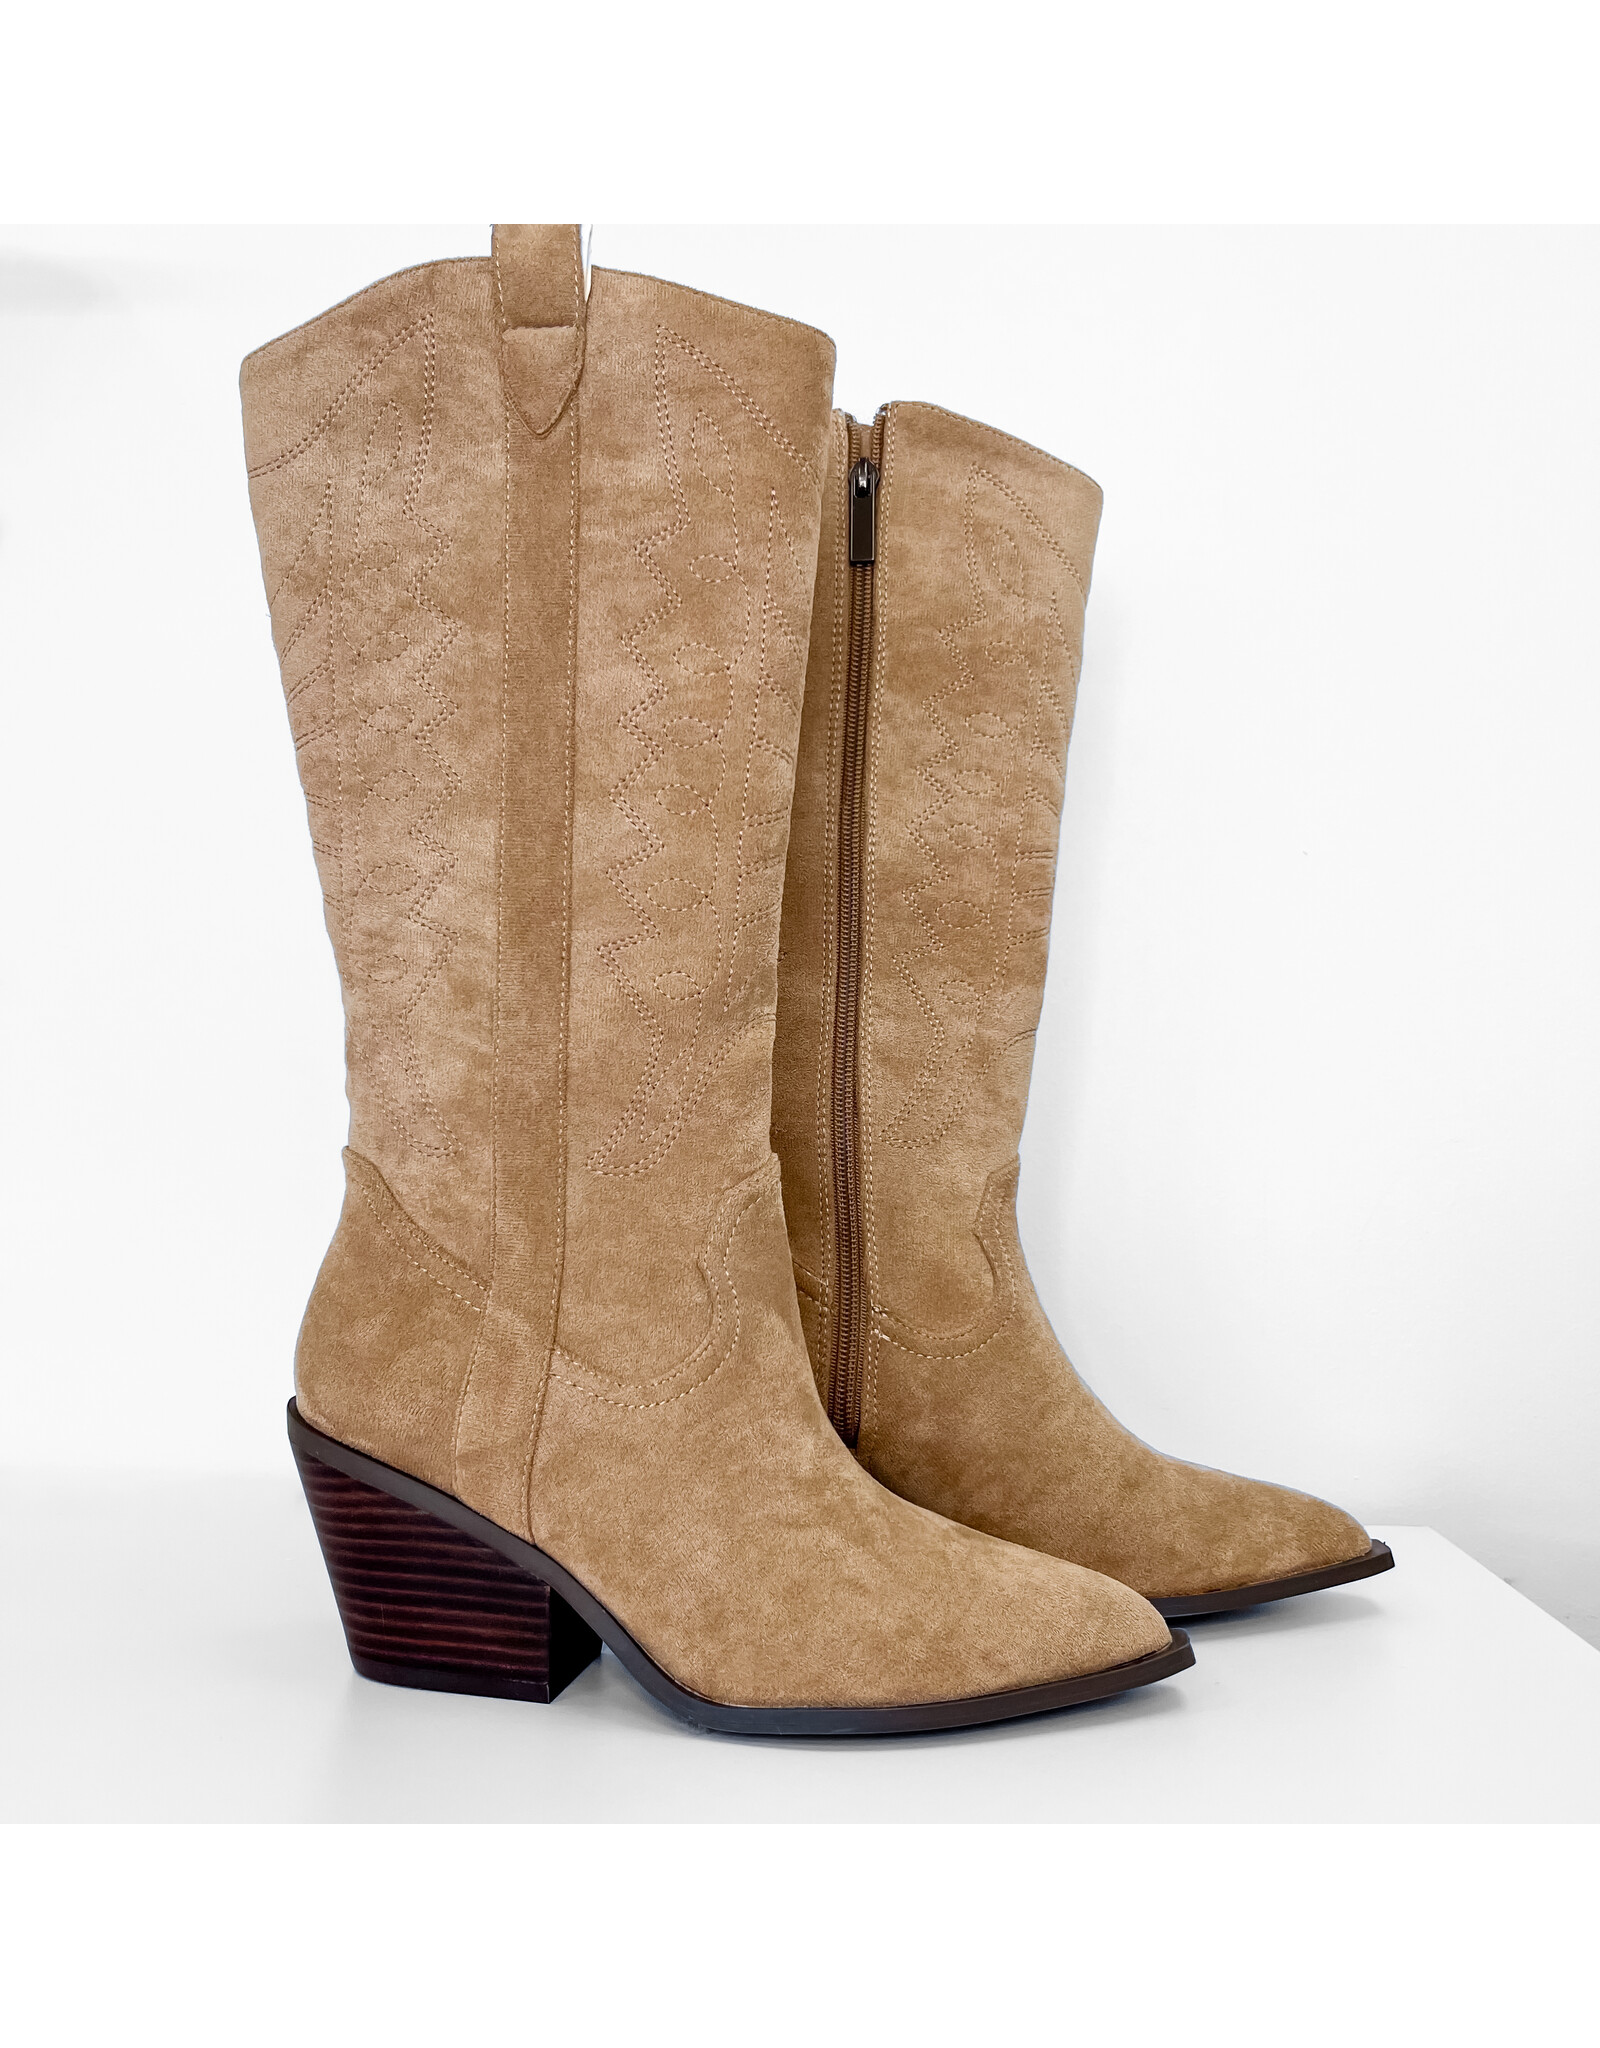 Camel Suede Howdy Boots